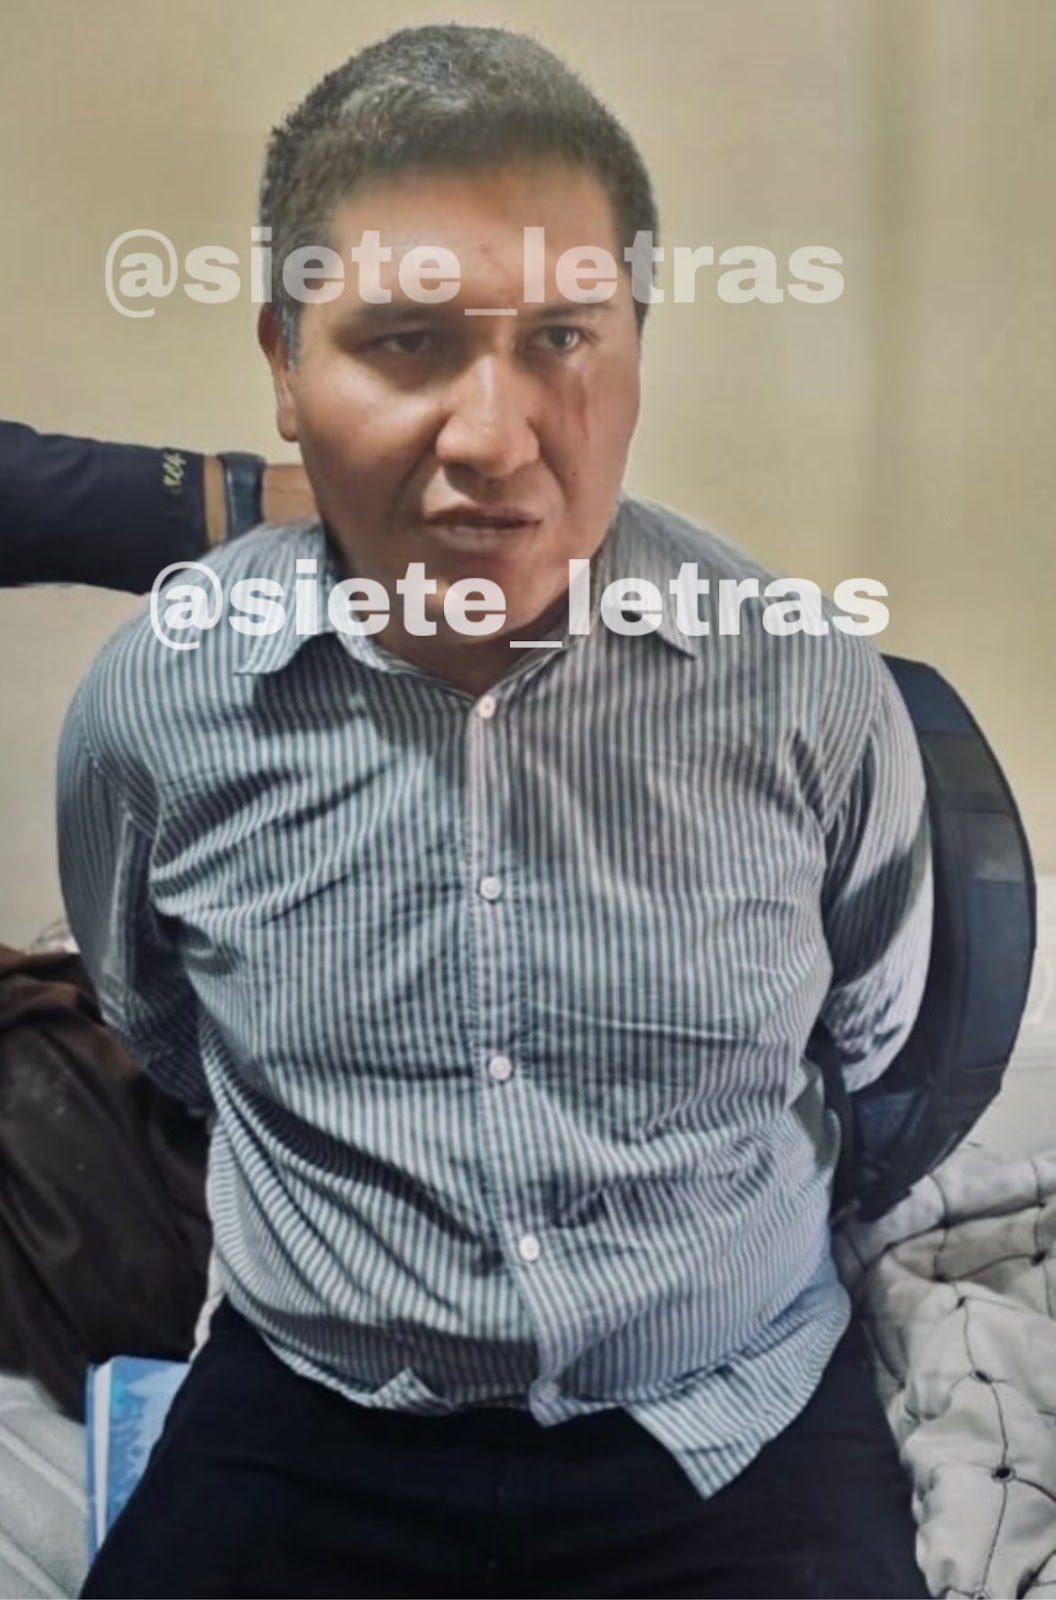 PHOTO Iztacalco Demon Miguel Cortes Miranda arrested for raping and